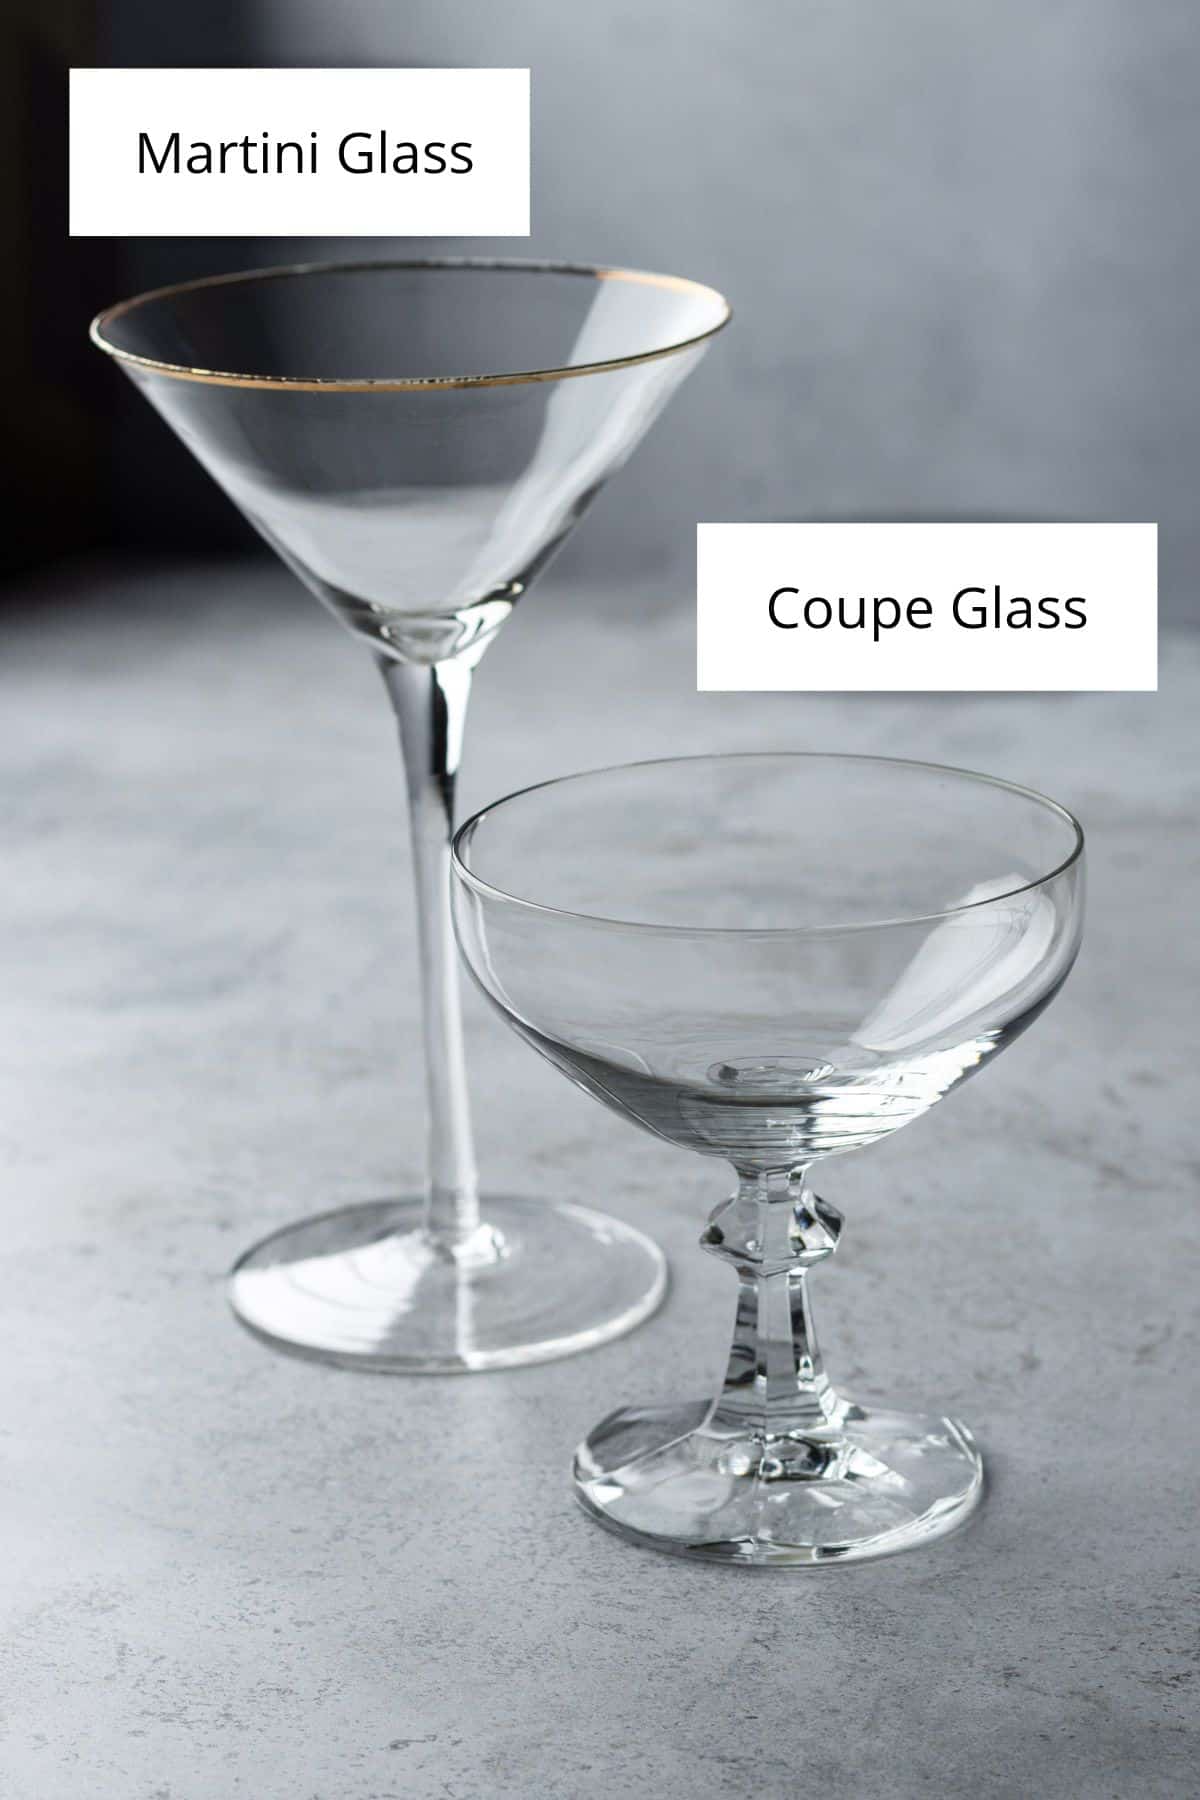 An empty martini glass on the left and an empty coupe glass on the right.